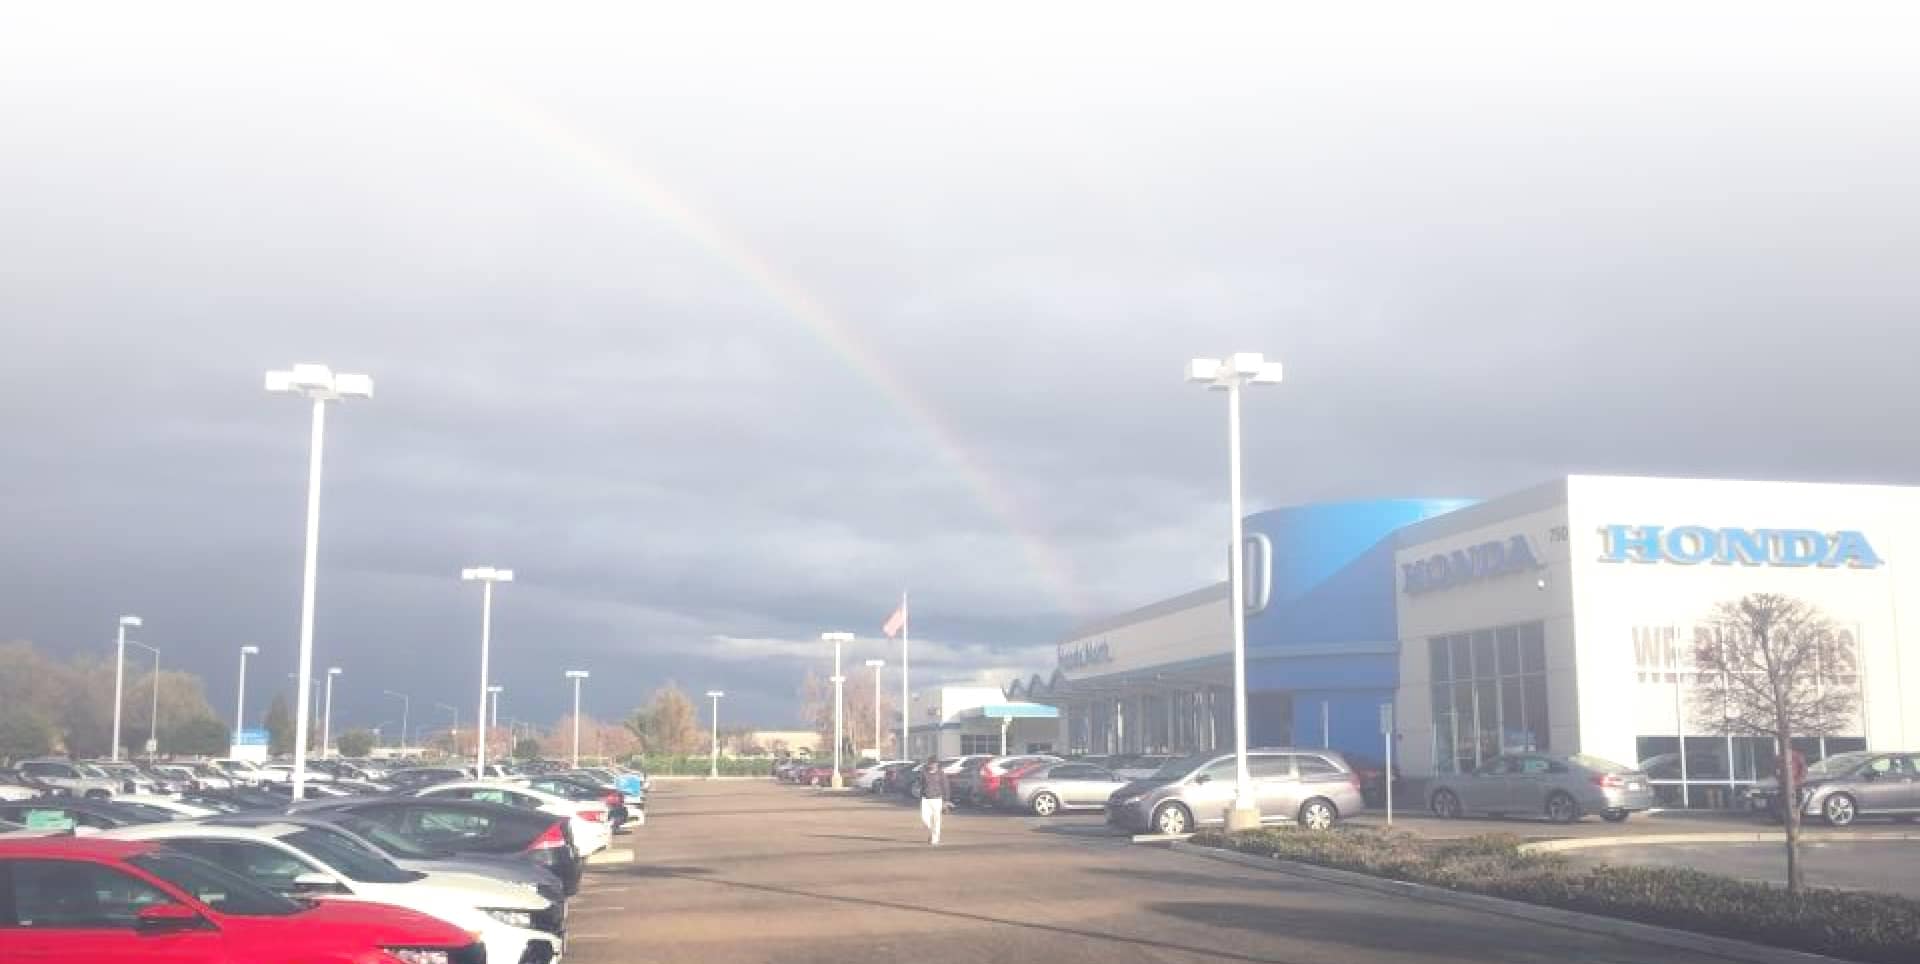 Honda North dealership with a rainbow in the sky